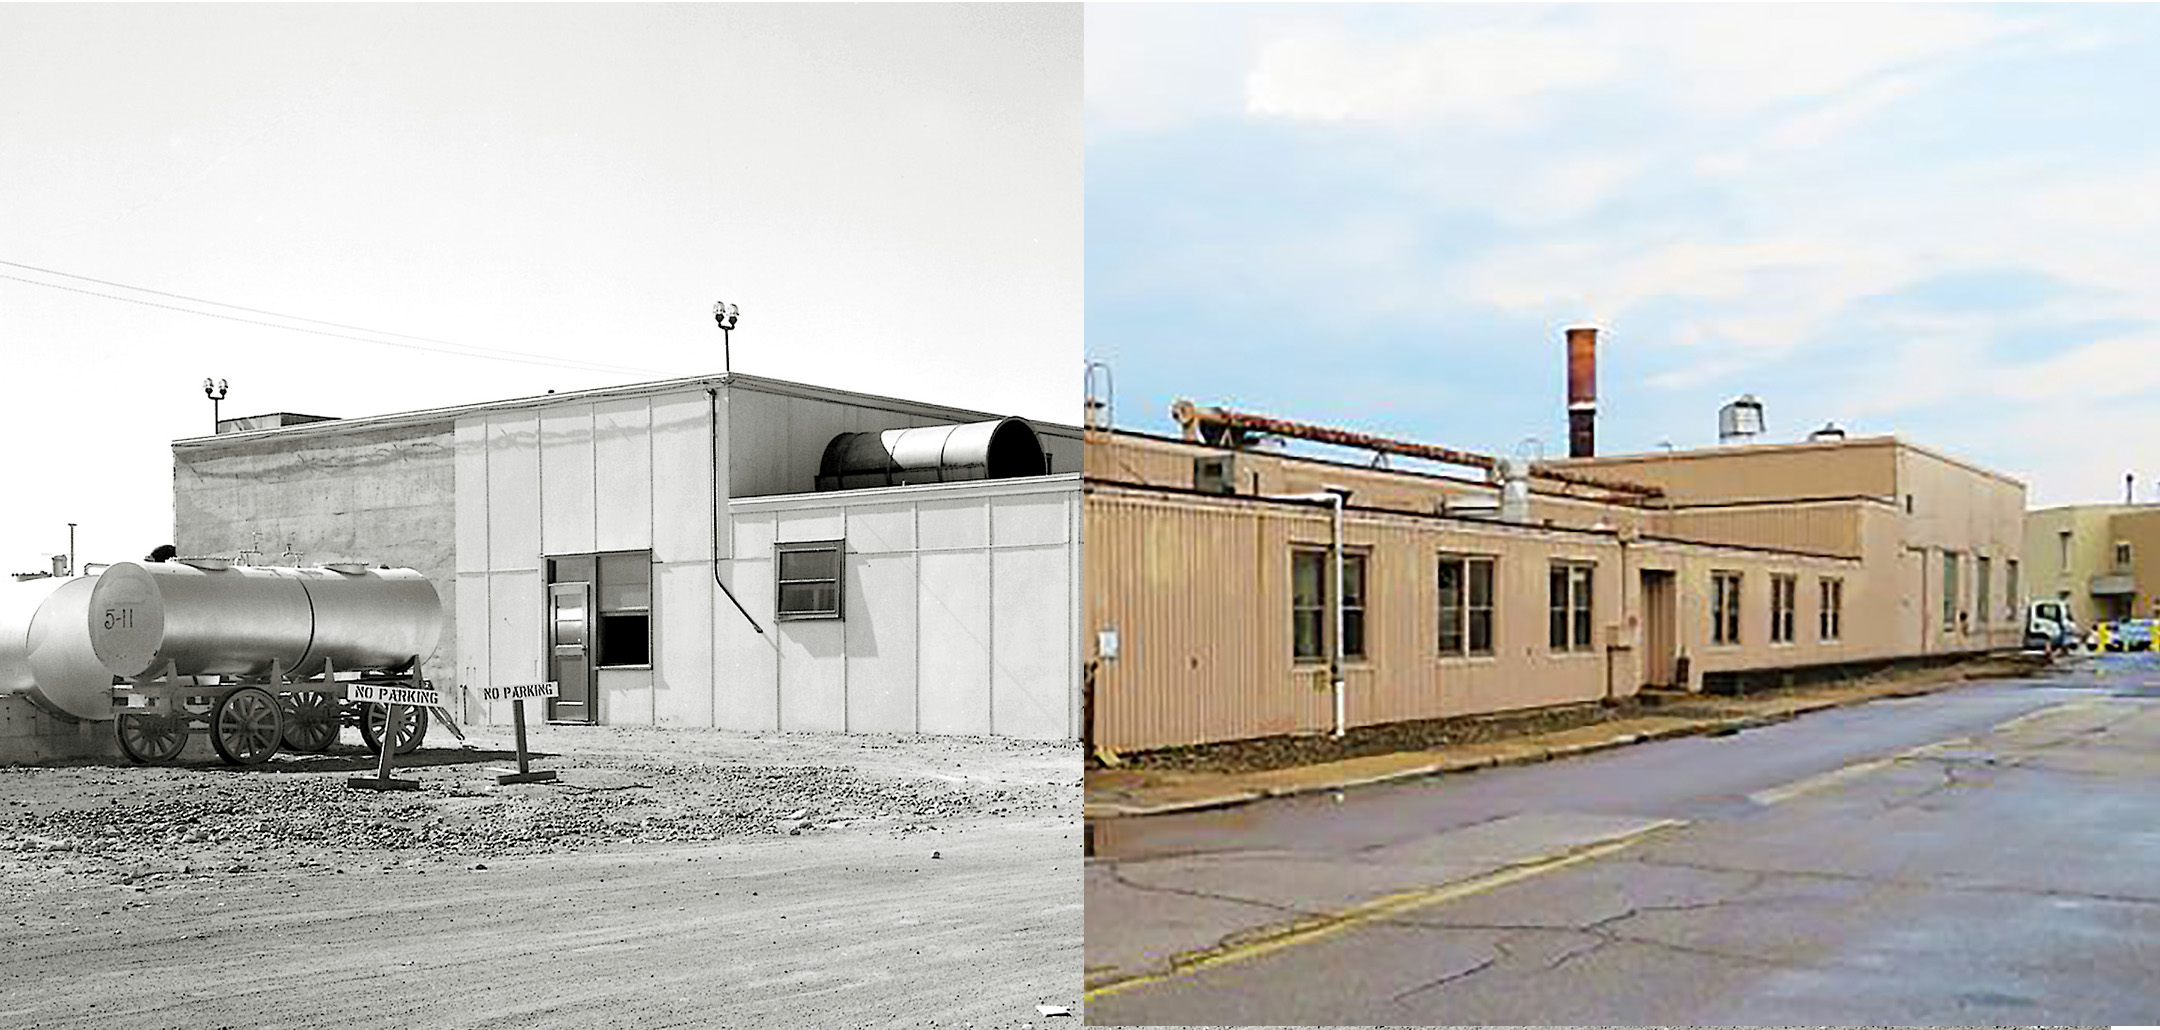 Split photo showing the exterior or the SPL in 1943 and 2017.